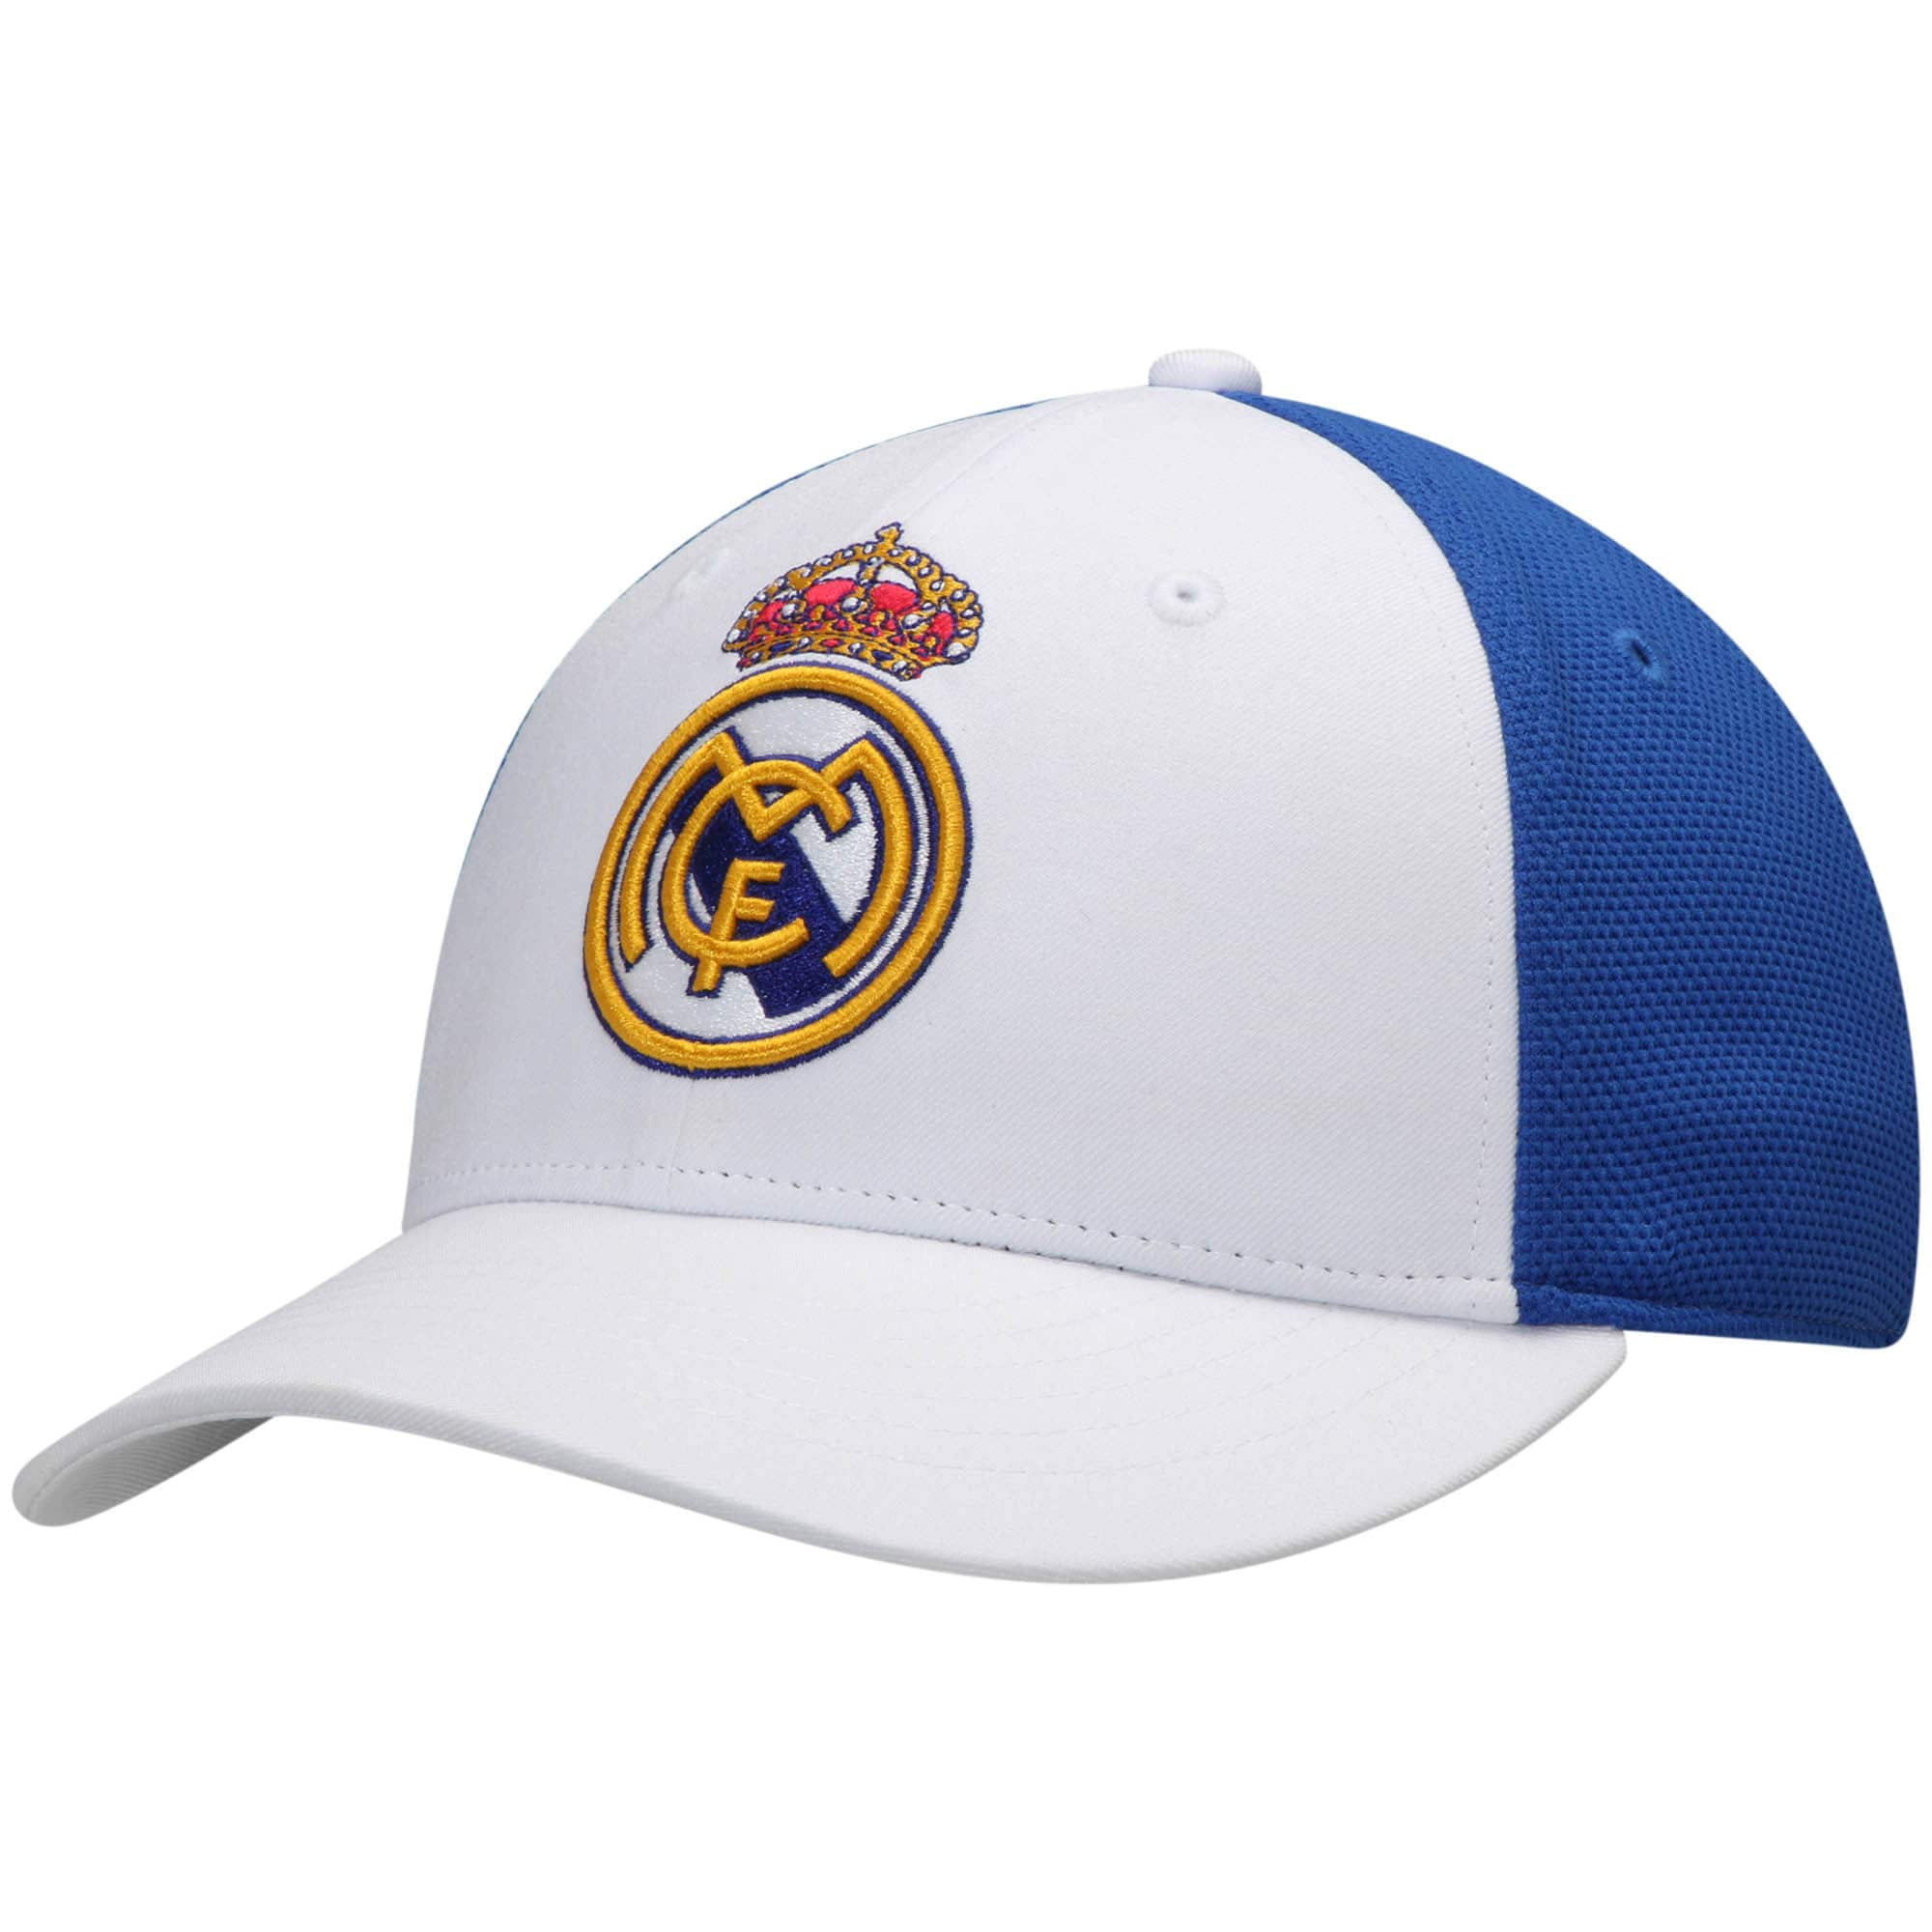 Real Madrid Player Cap Kids Adjustable Football Sun Official Product 